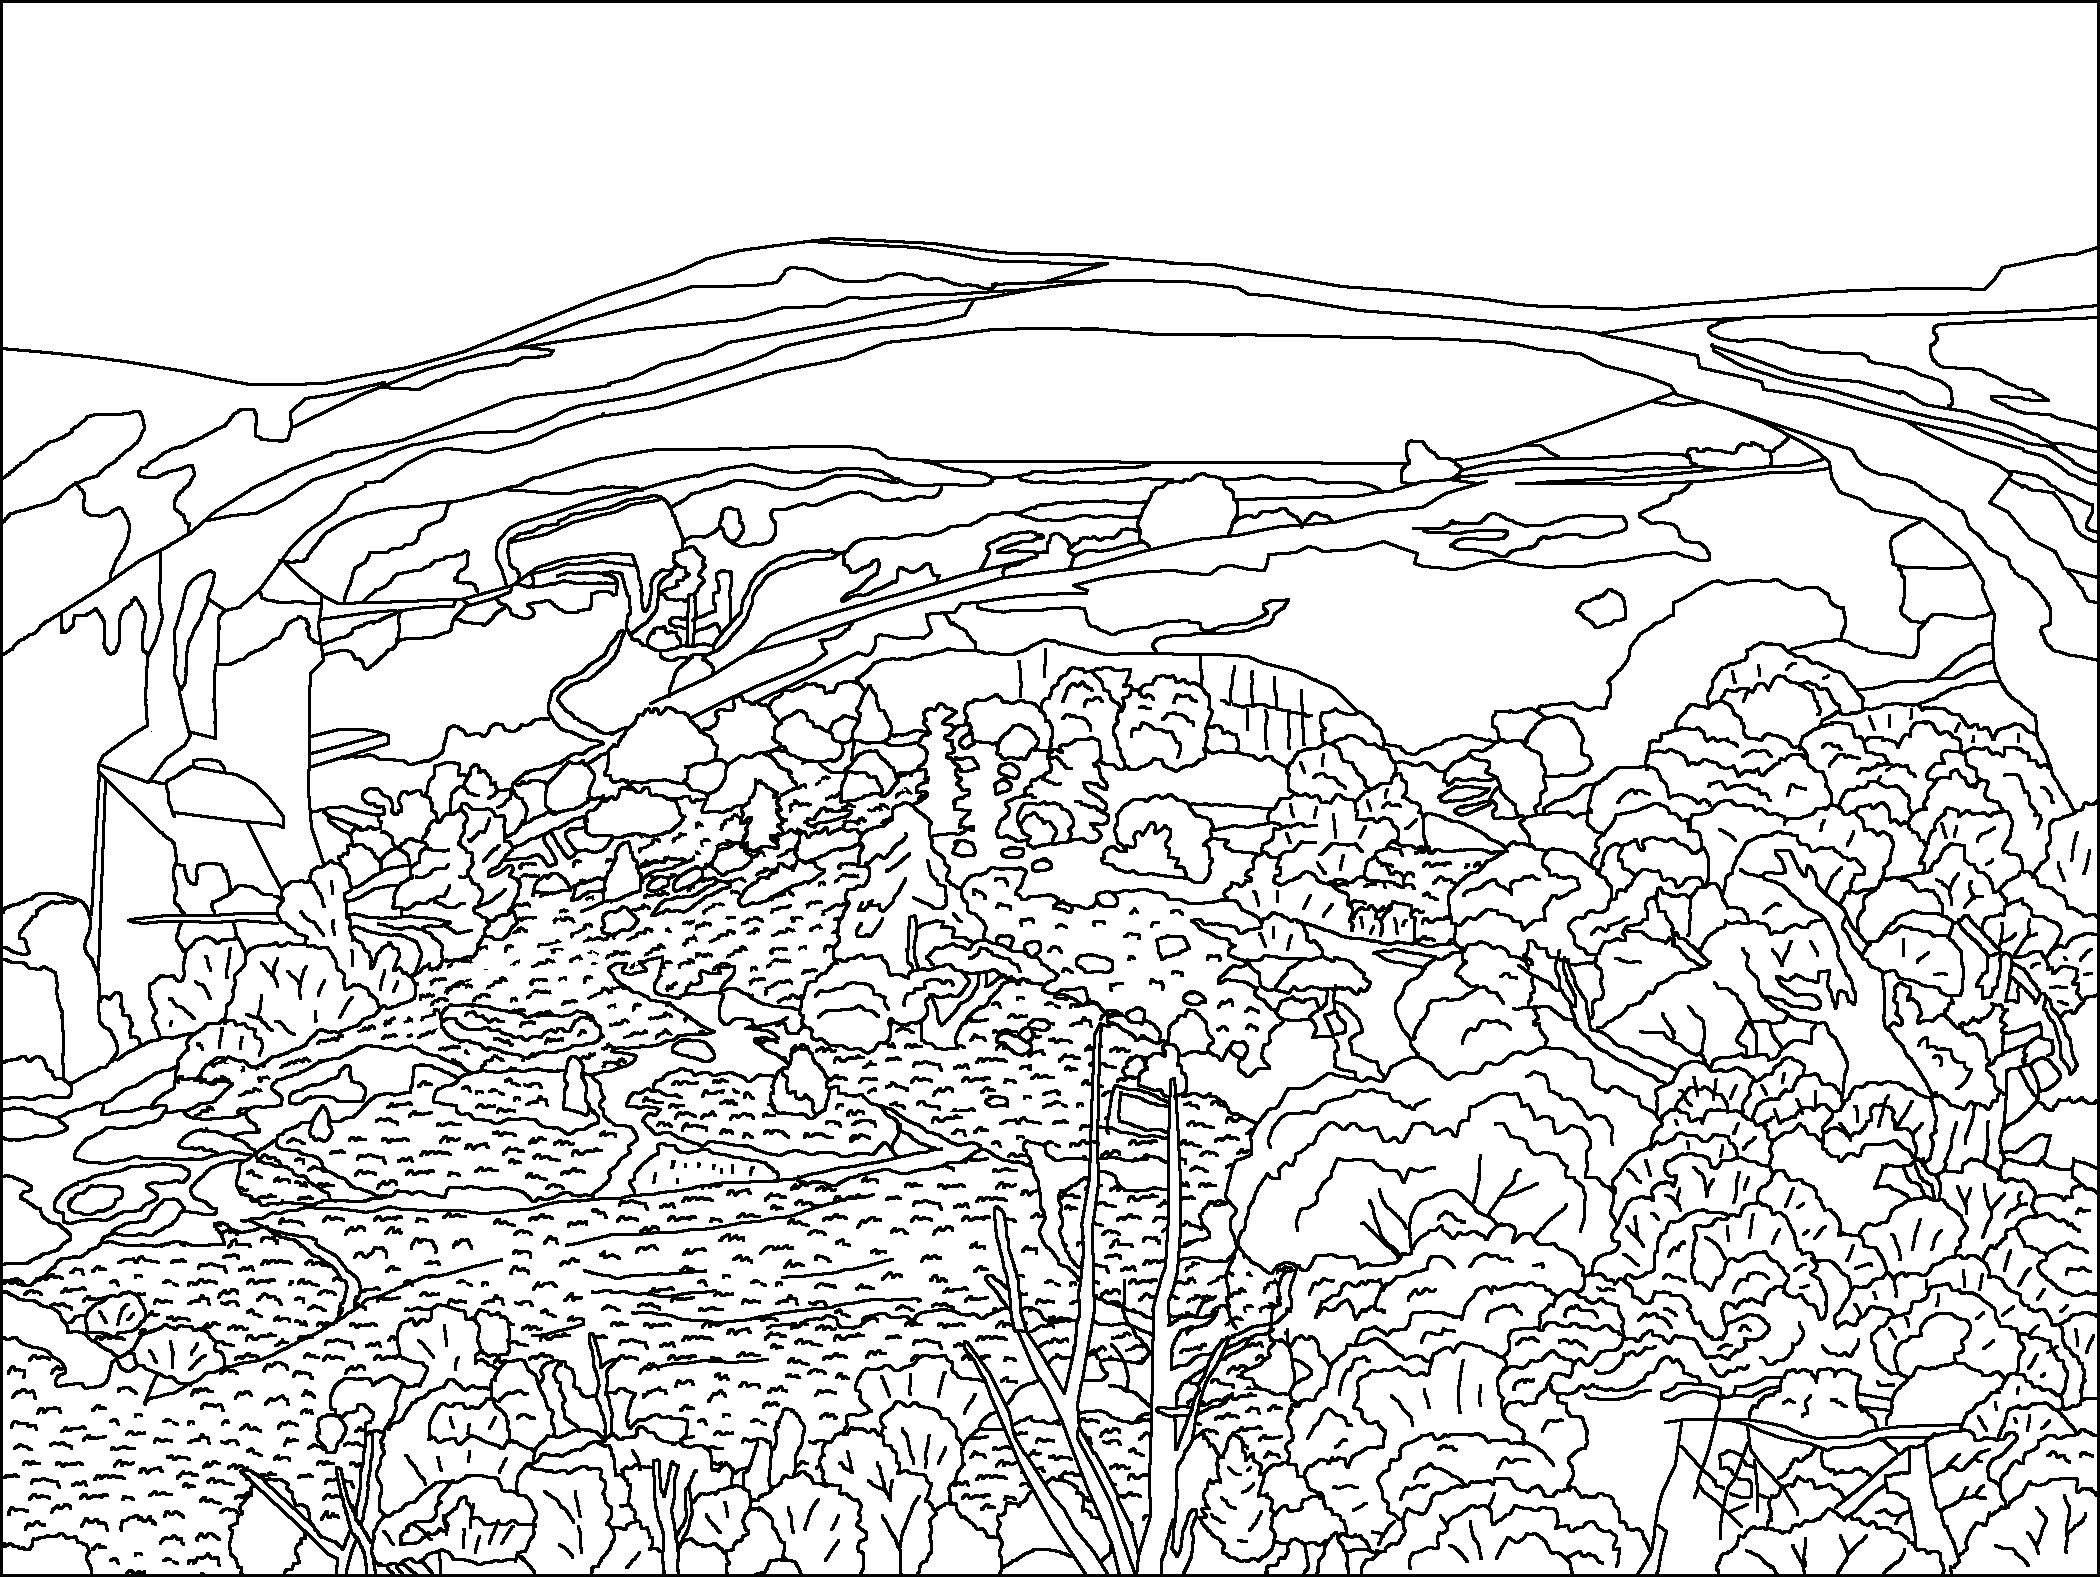 Landscape Coloring Pages To Download And Print For Free   Coloring ...